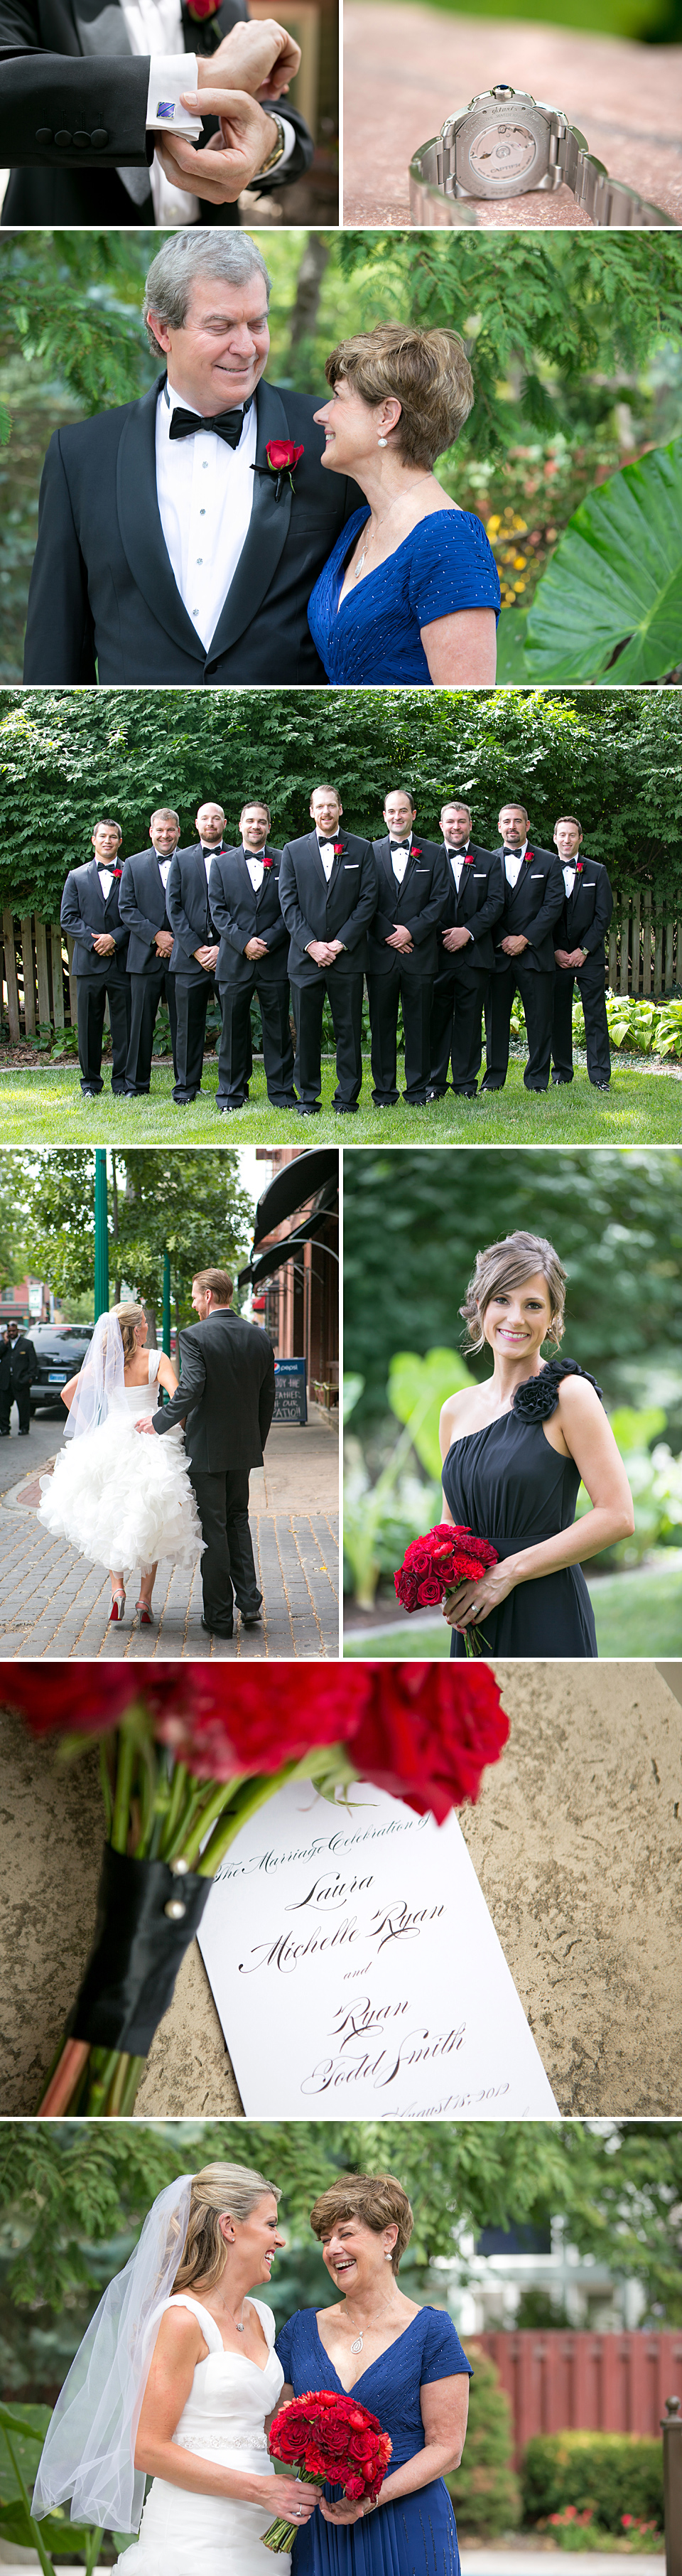 K-state fans, groomsmen, boutonnieres, Bouquet, Mary Shalee makeup, bridesmaid, elegant photography